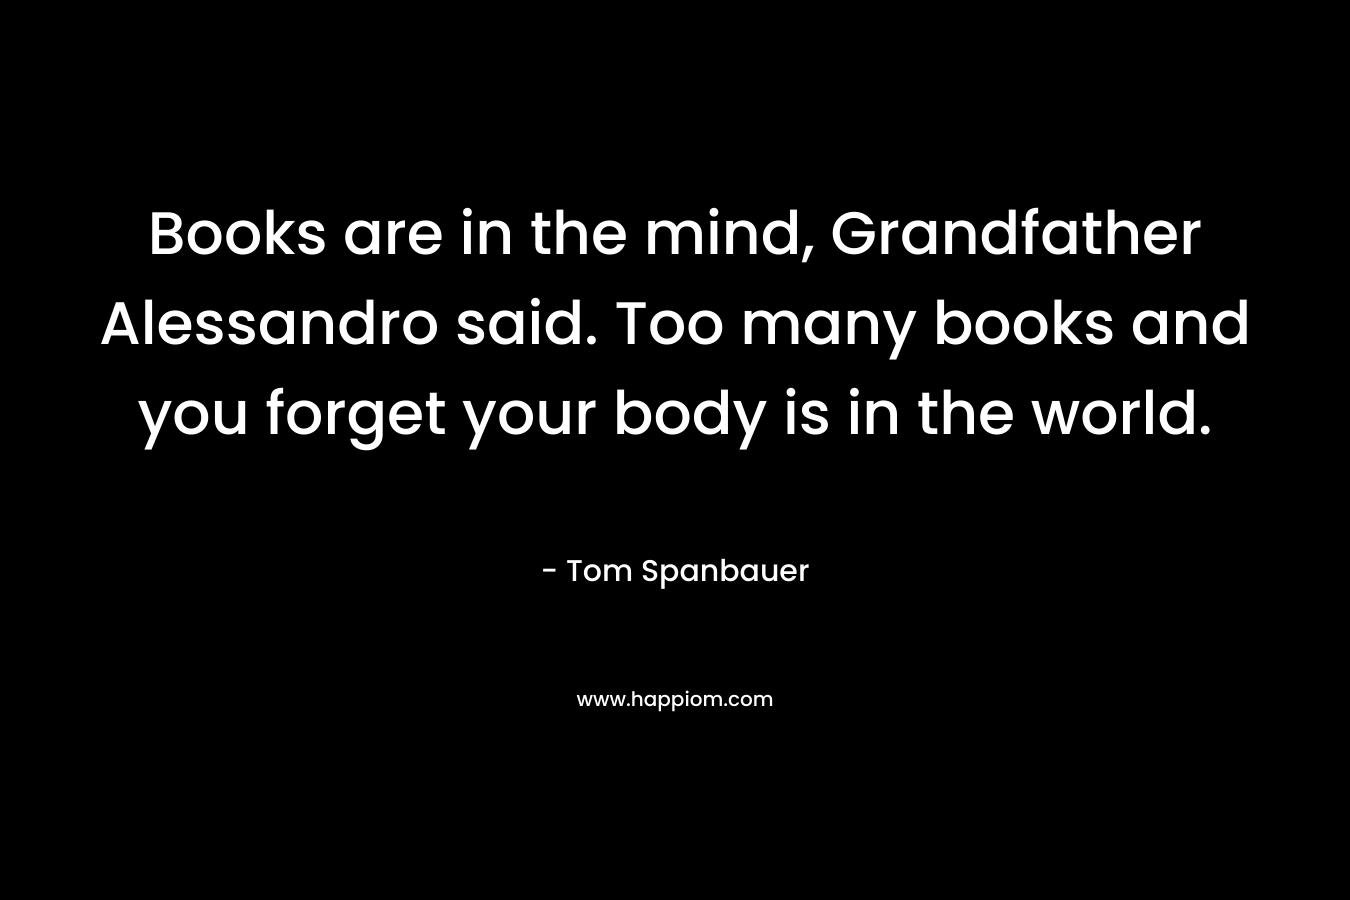 Books are in the mind, Grandfather Alessandro said. Too many books and you forget your body is in the world.